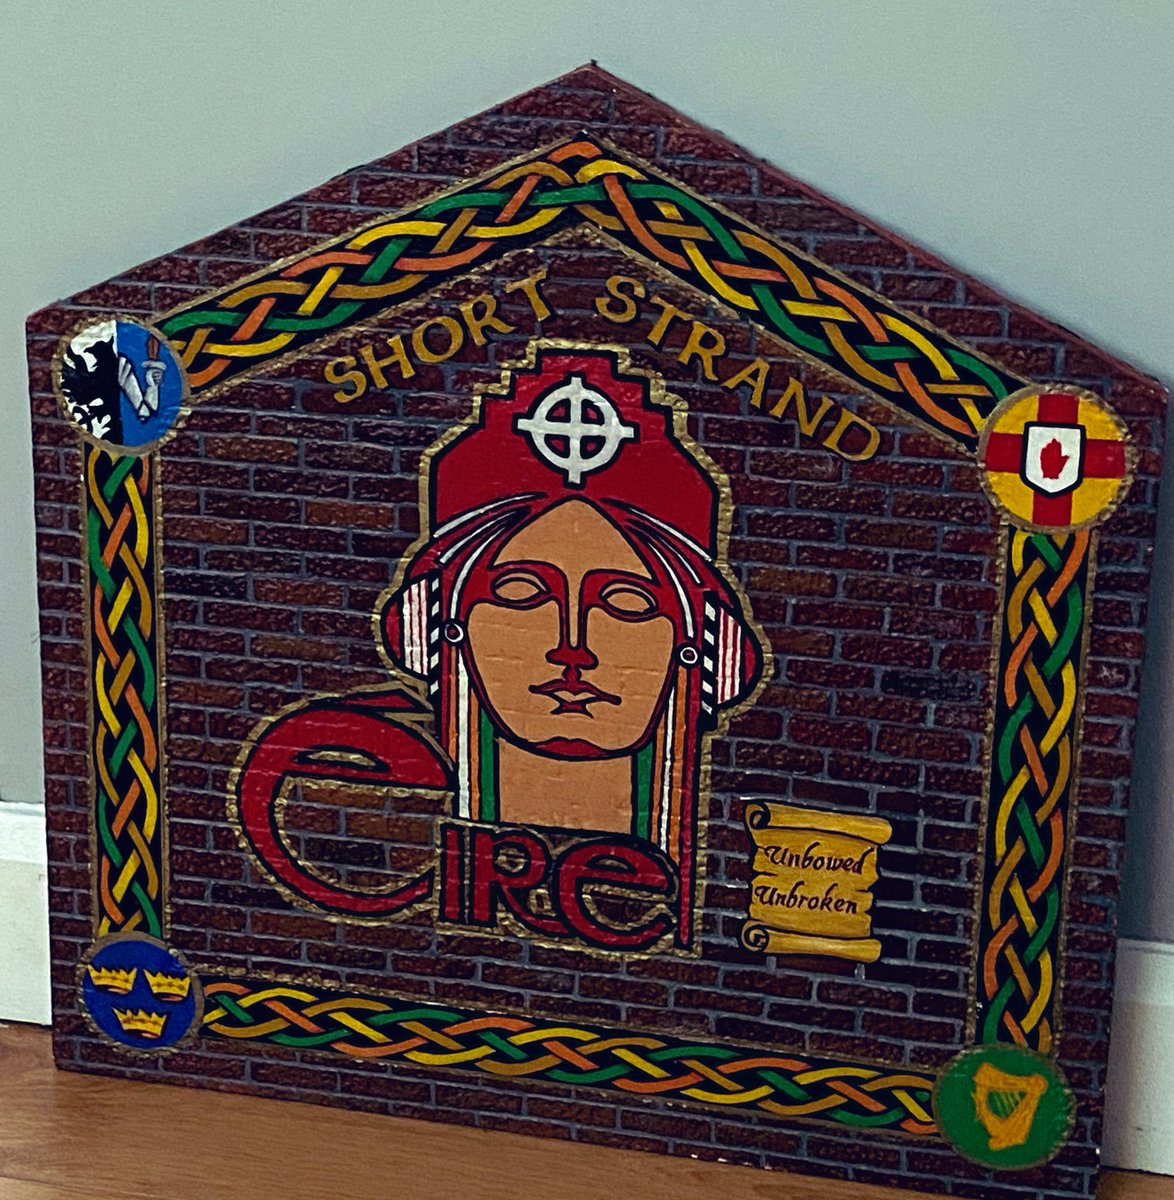 My Uncle Seany painted this “mini mural” for me some years back - it reminds me of him and home - so it’s coming to the Leinster House office with me later this week. 🎨 @seanycfc94 #CuimhníCinn